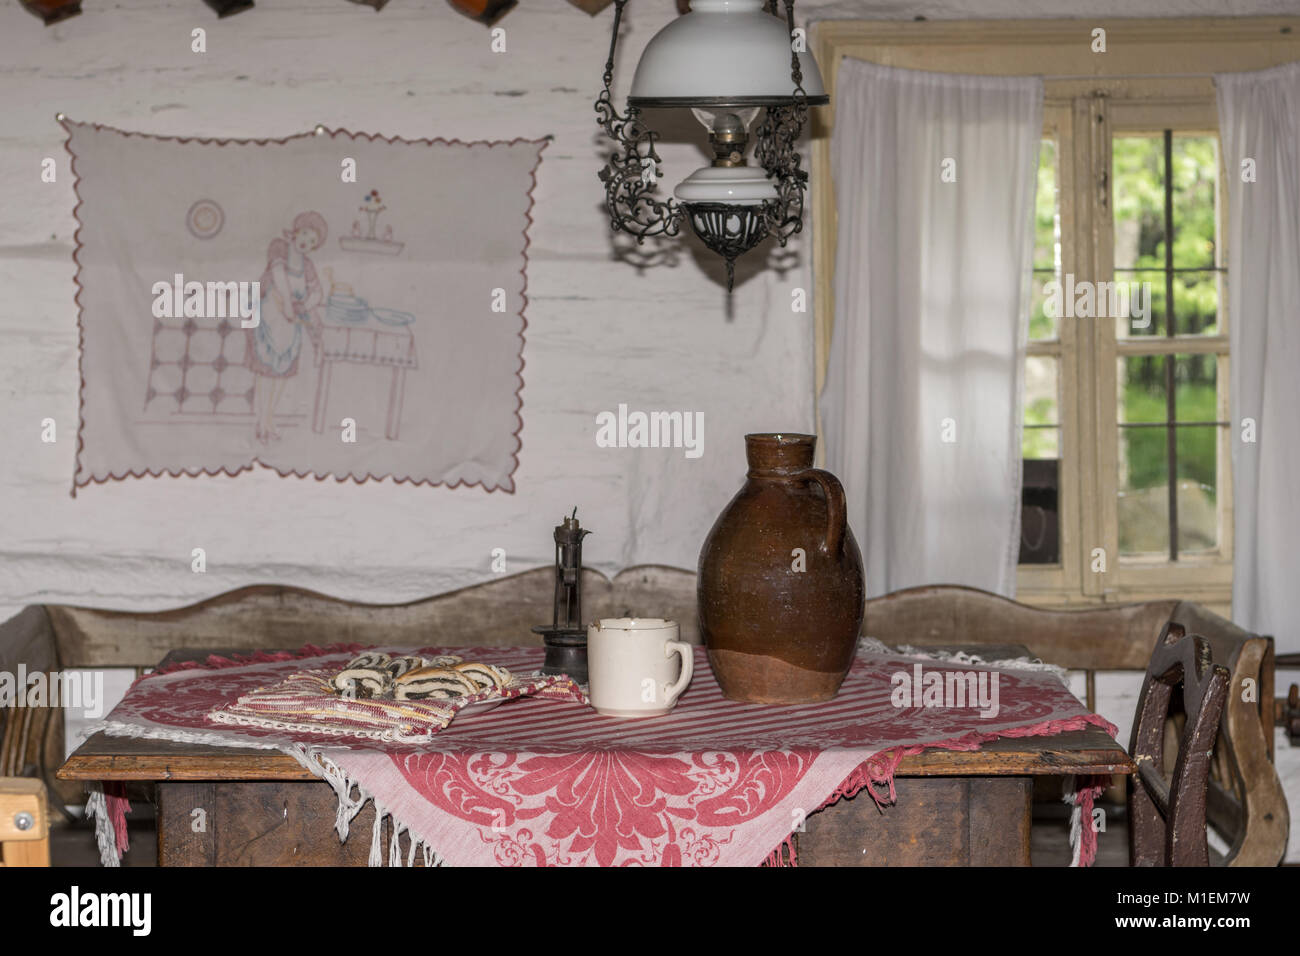 Traditional dining table with jar, mug and poppyseed rolls Stock Photo